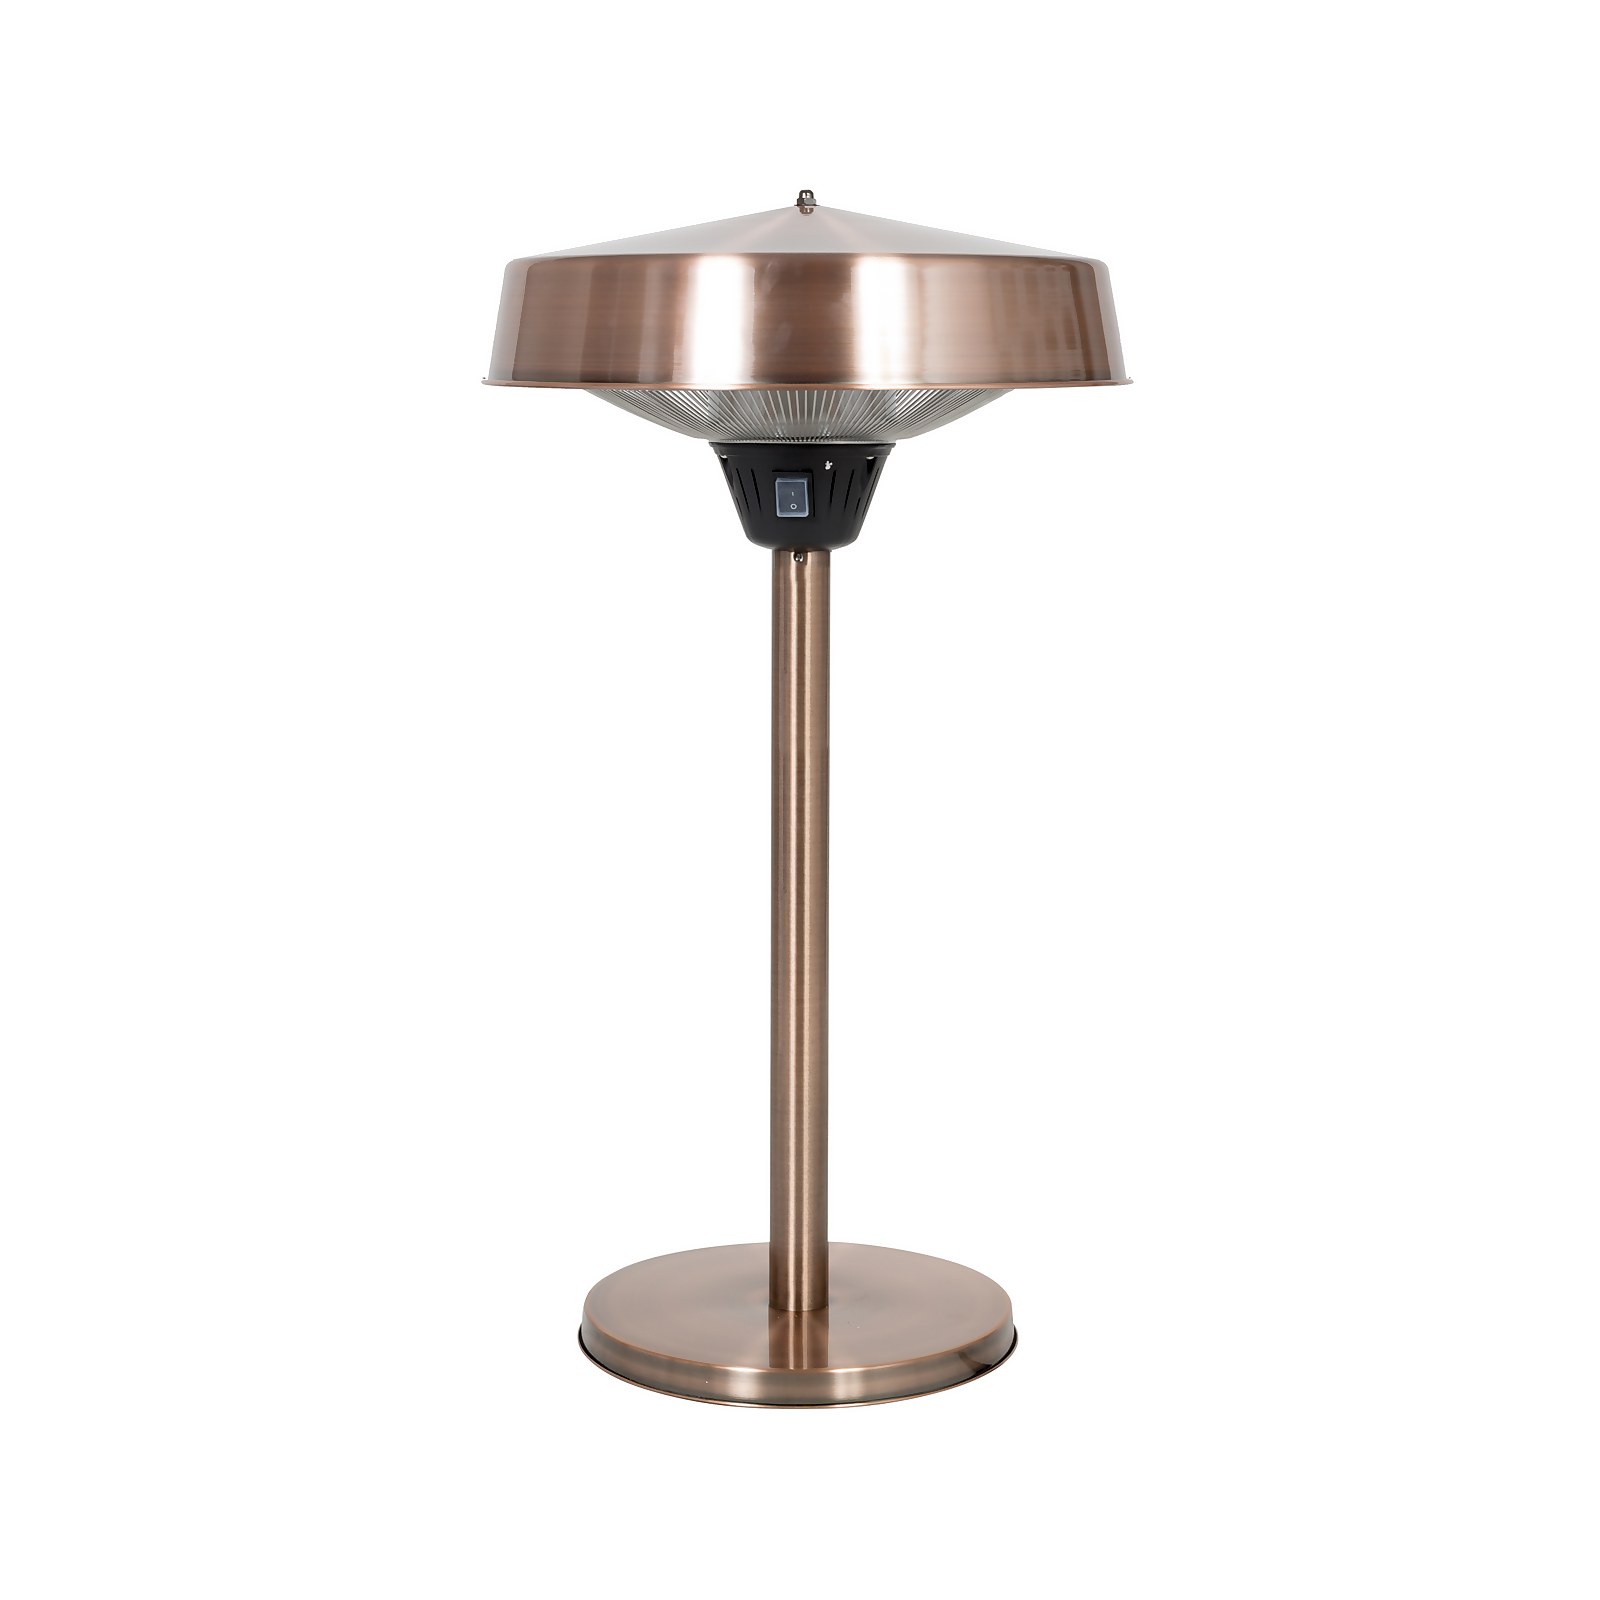 Photo of Copper Electric Tabletop Patio Heater